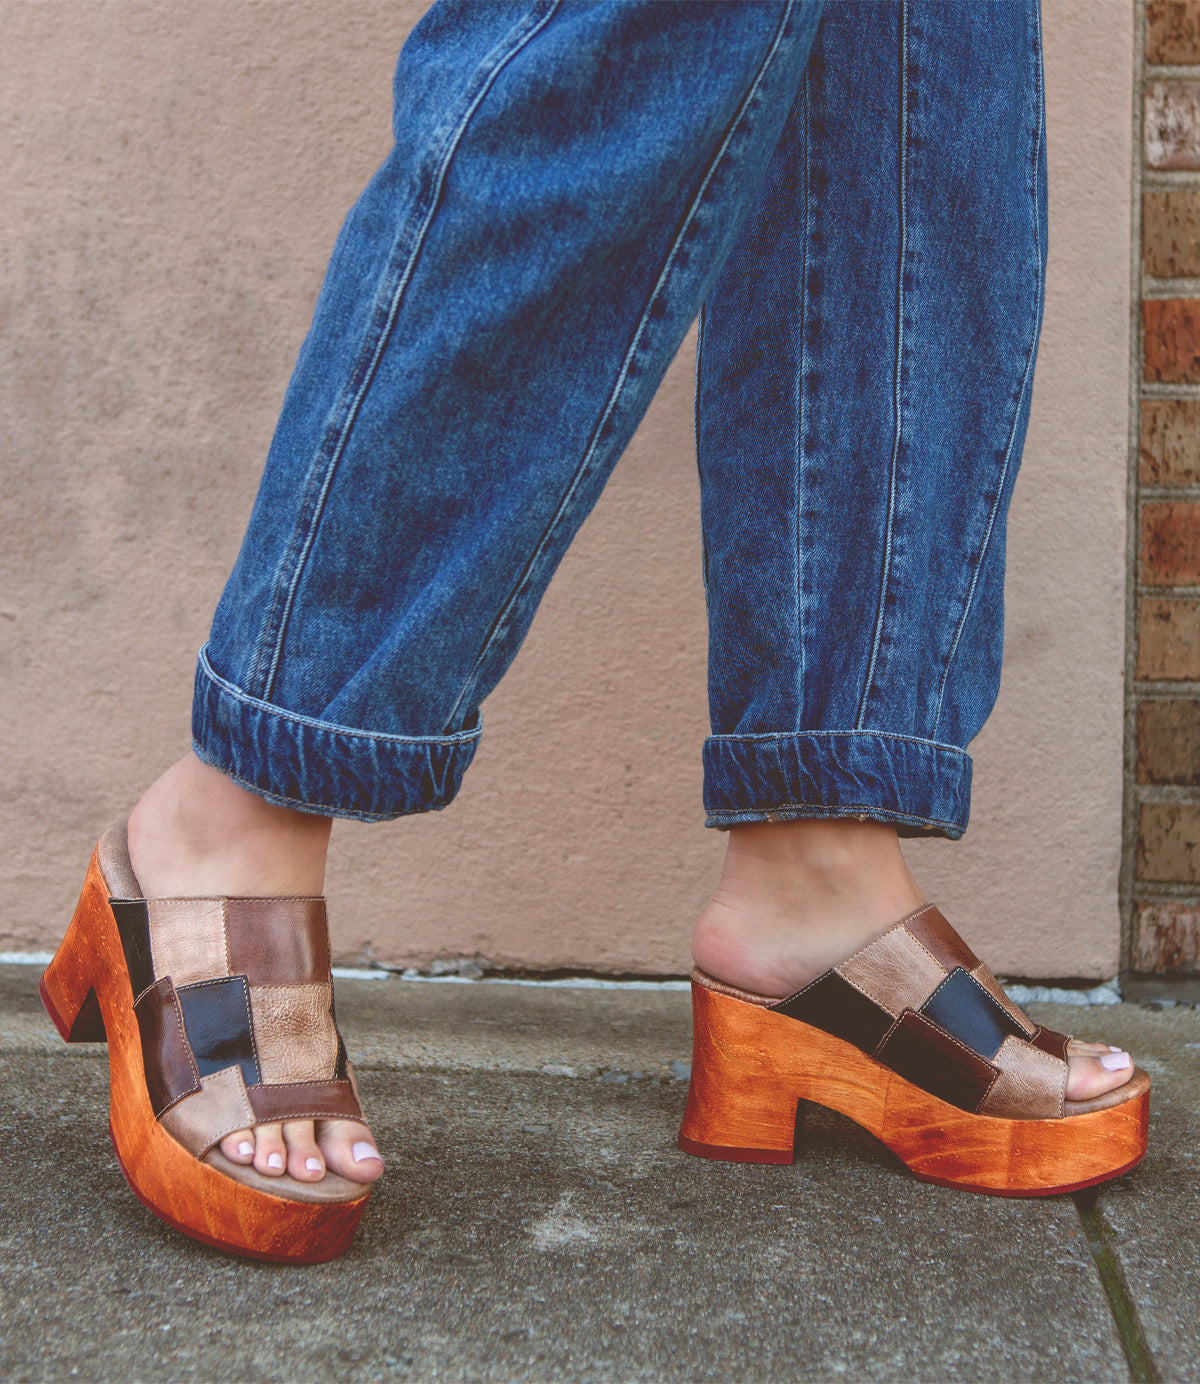 A woman wearing jeans and a pair of environmentally-conscious Bed Stu Vanquish wooden sandals with an open-toe design.